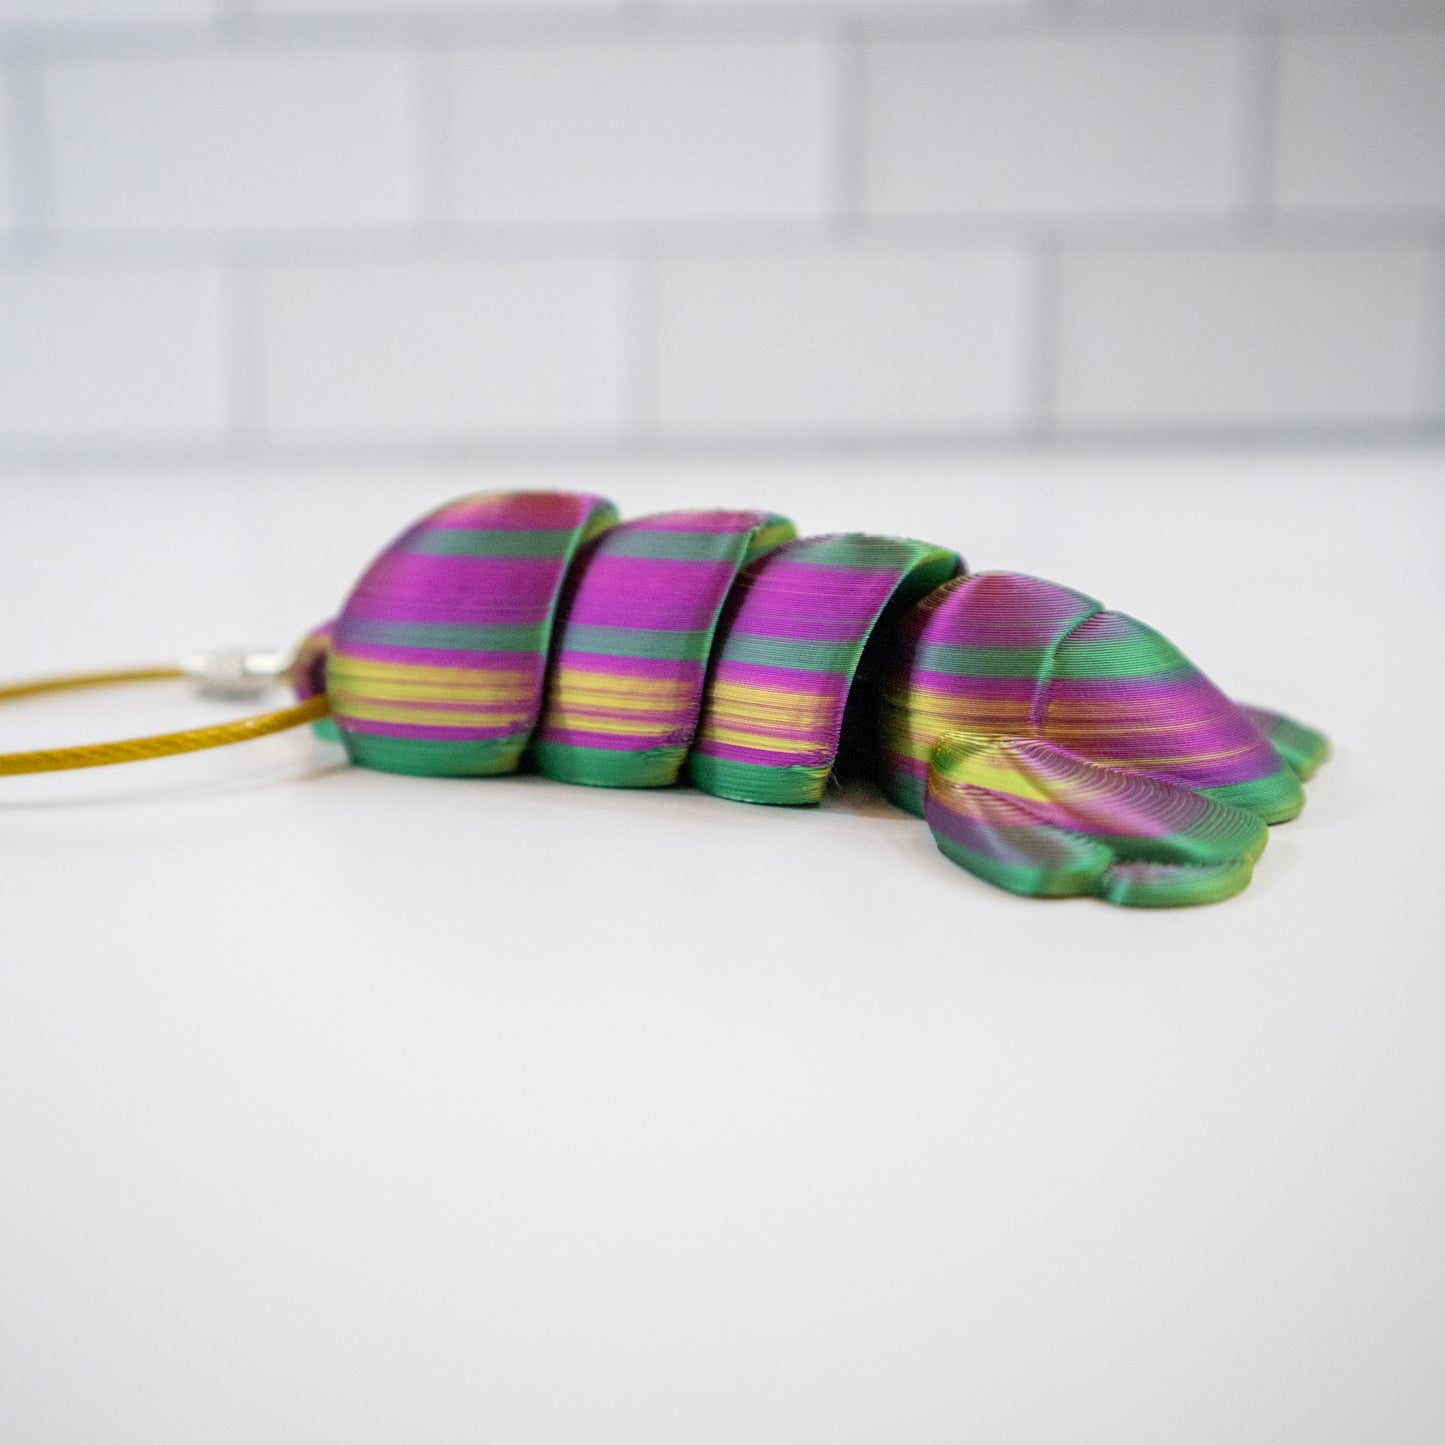 Pinch of Panache: The Articulating Lobster Tail Keychain